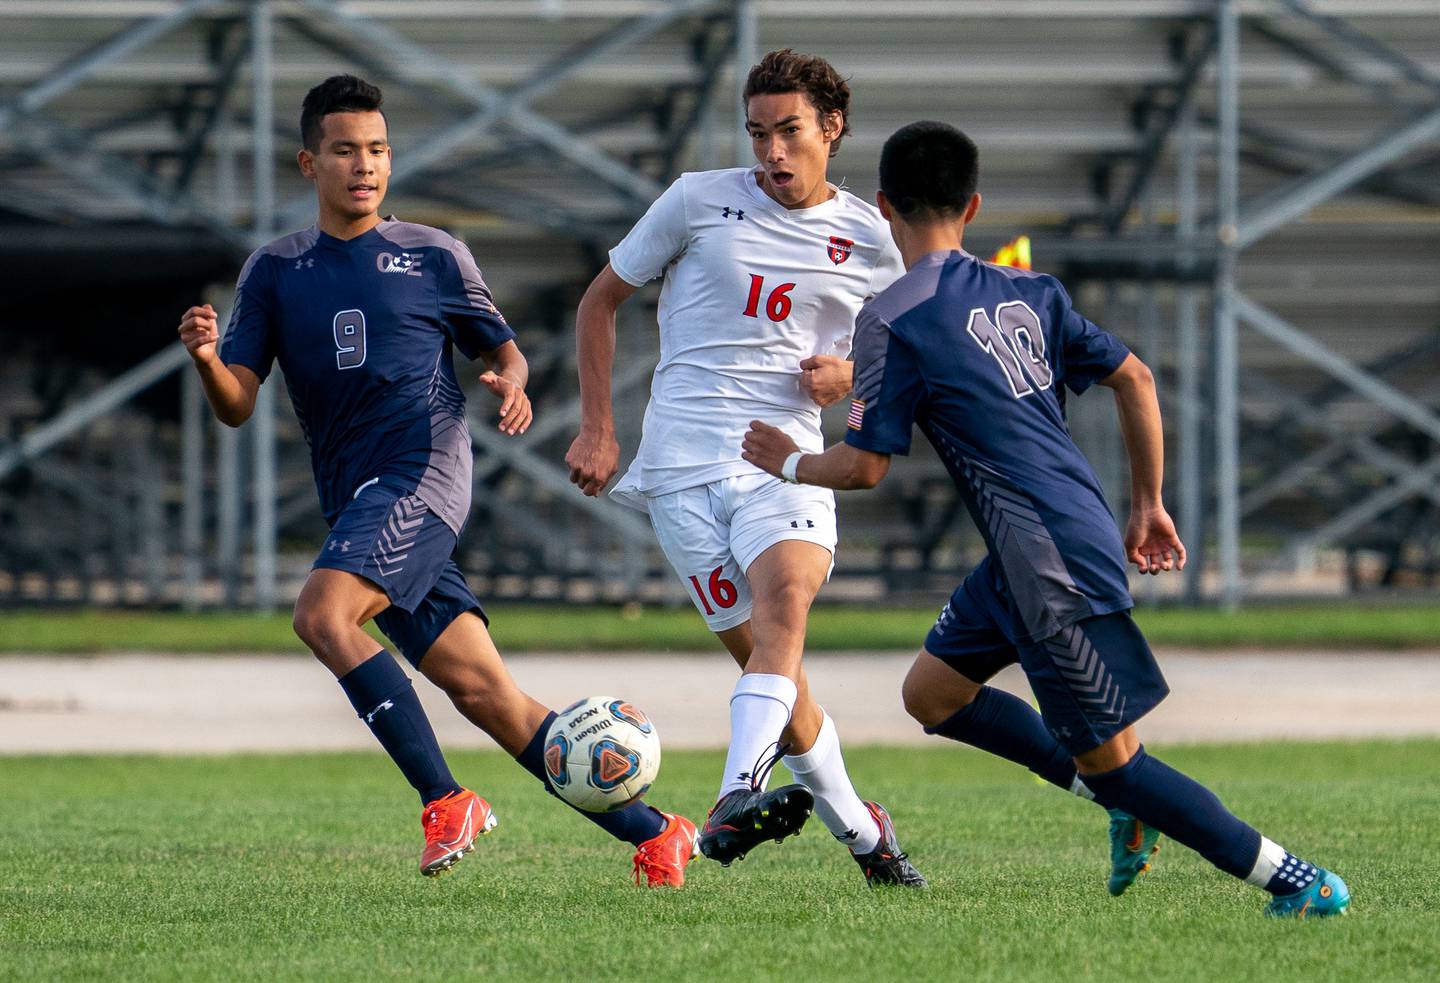 Oswego’s Benjamin Sobecki (16) passes the ball between Oswego East's Dupablo Parodis-Yu (9) and Israel Torres (10) during a soccer match at Oswego East High School on Monday, Sep 26, 2022.